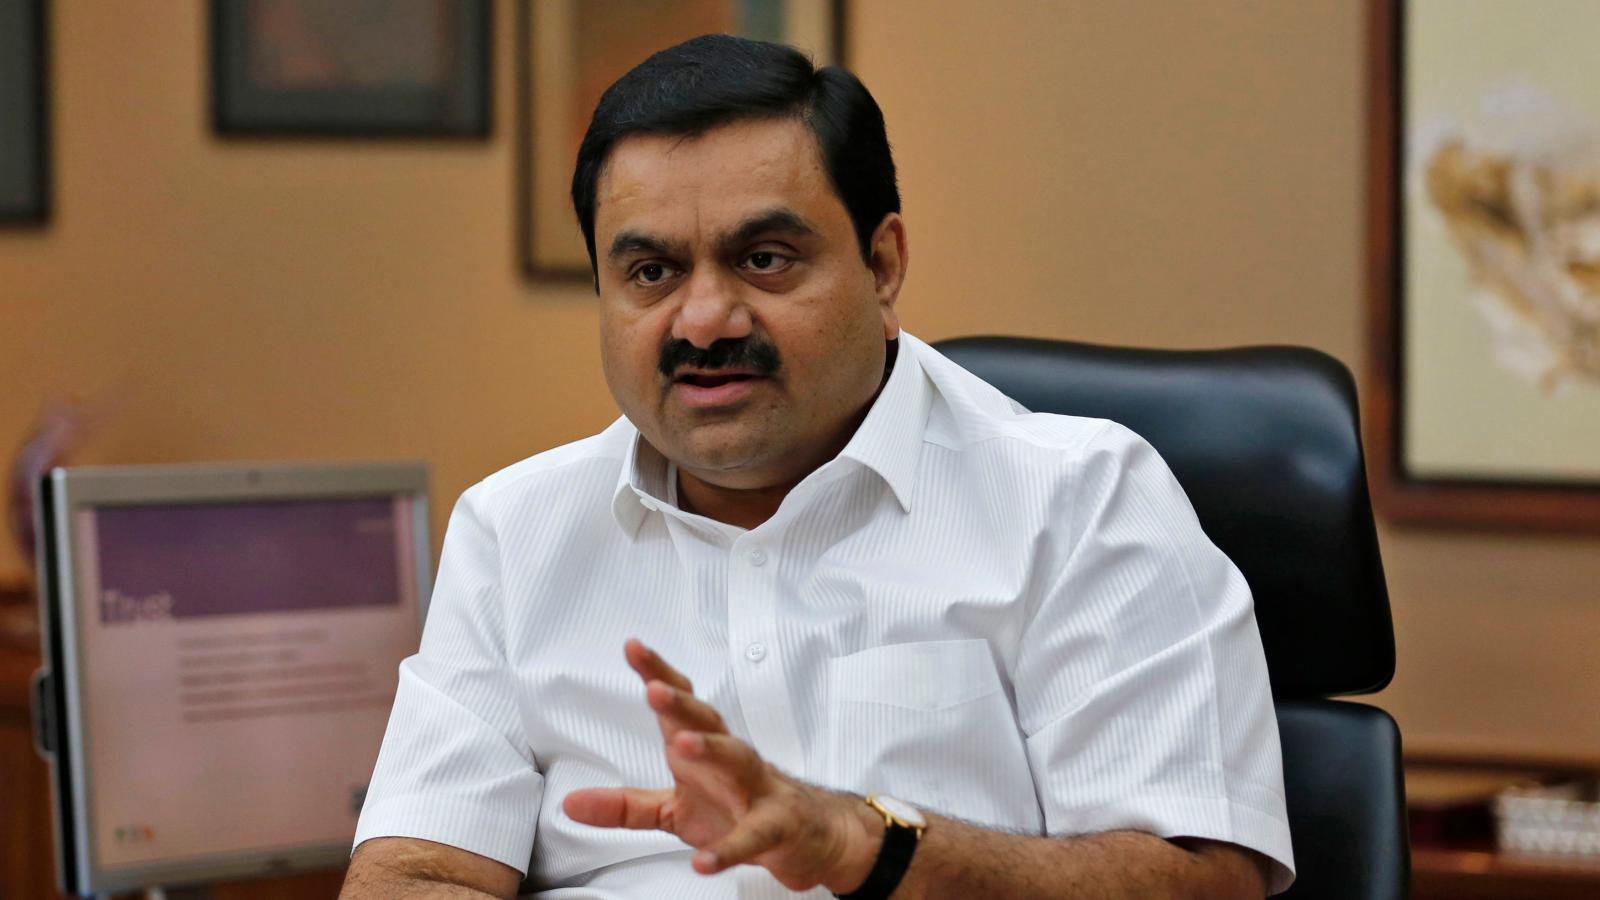 How does the Adani Group's image affect the perception of corporate India on foreign shores?